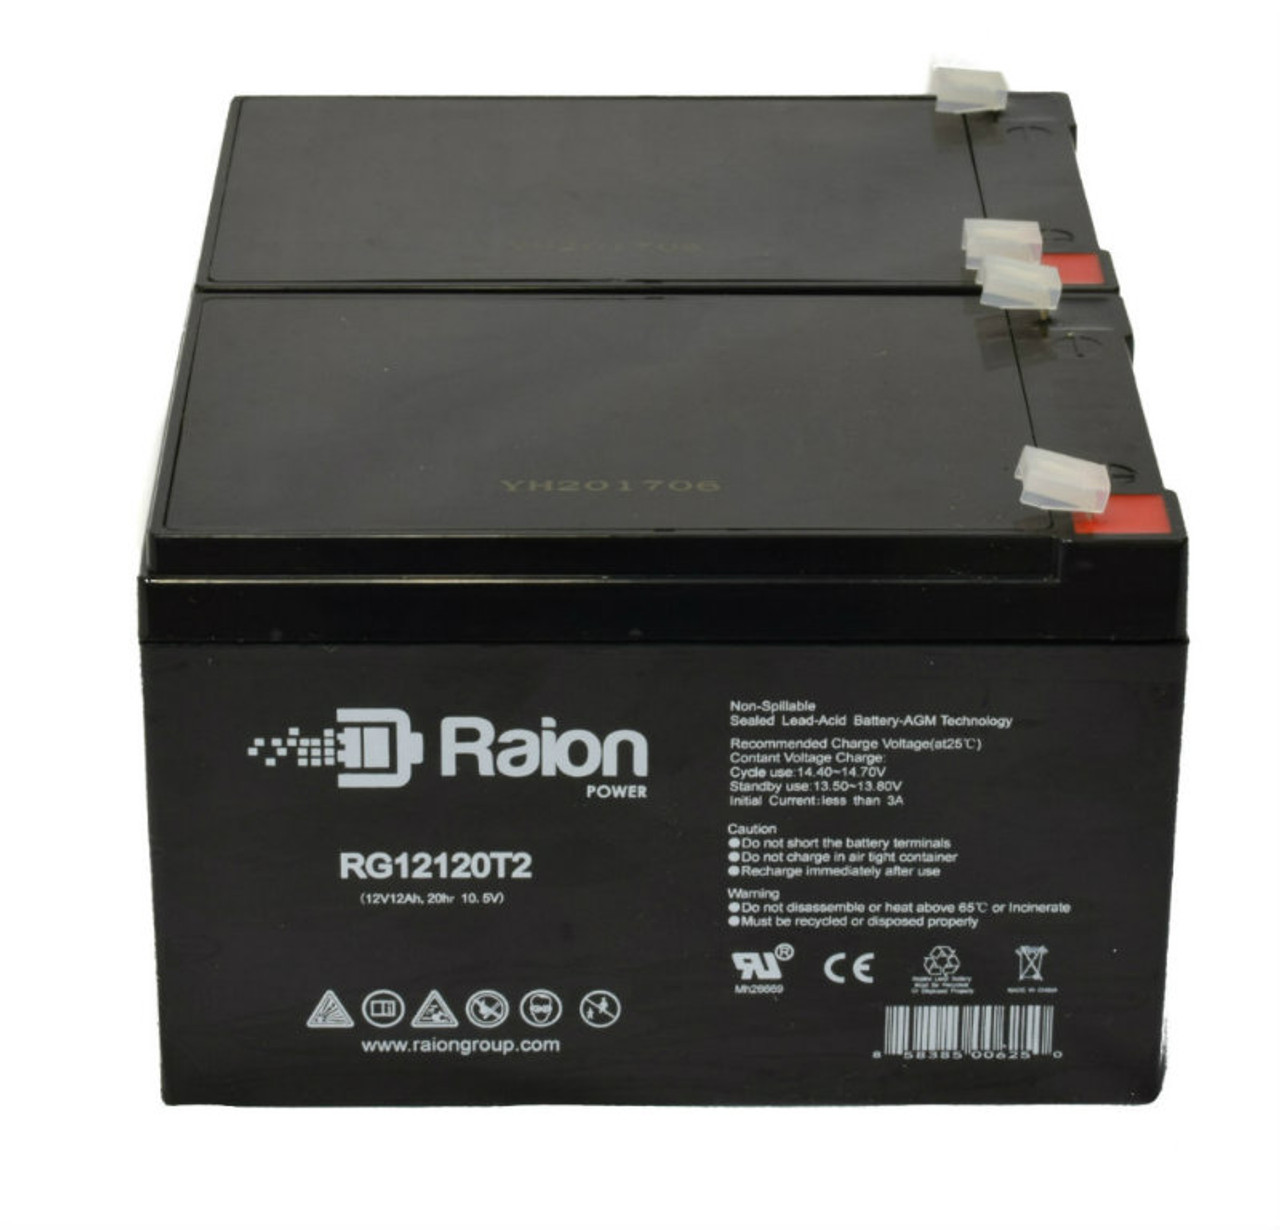 Raion Power 12V 12Ah Non-Spillable Compatible Replacement Battery for ExpertPower EXP12120 - (2 Pack)